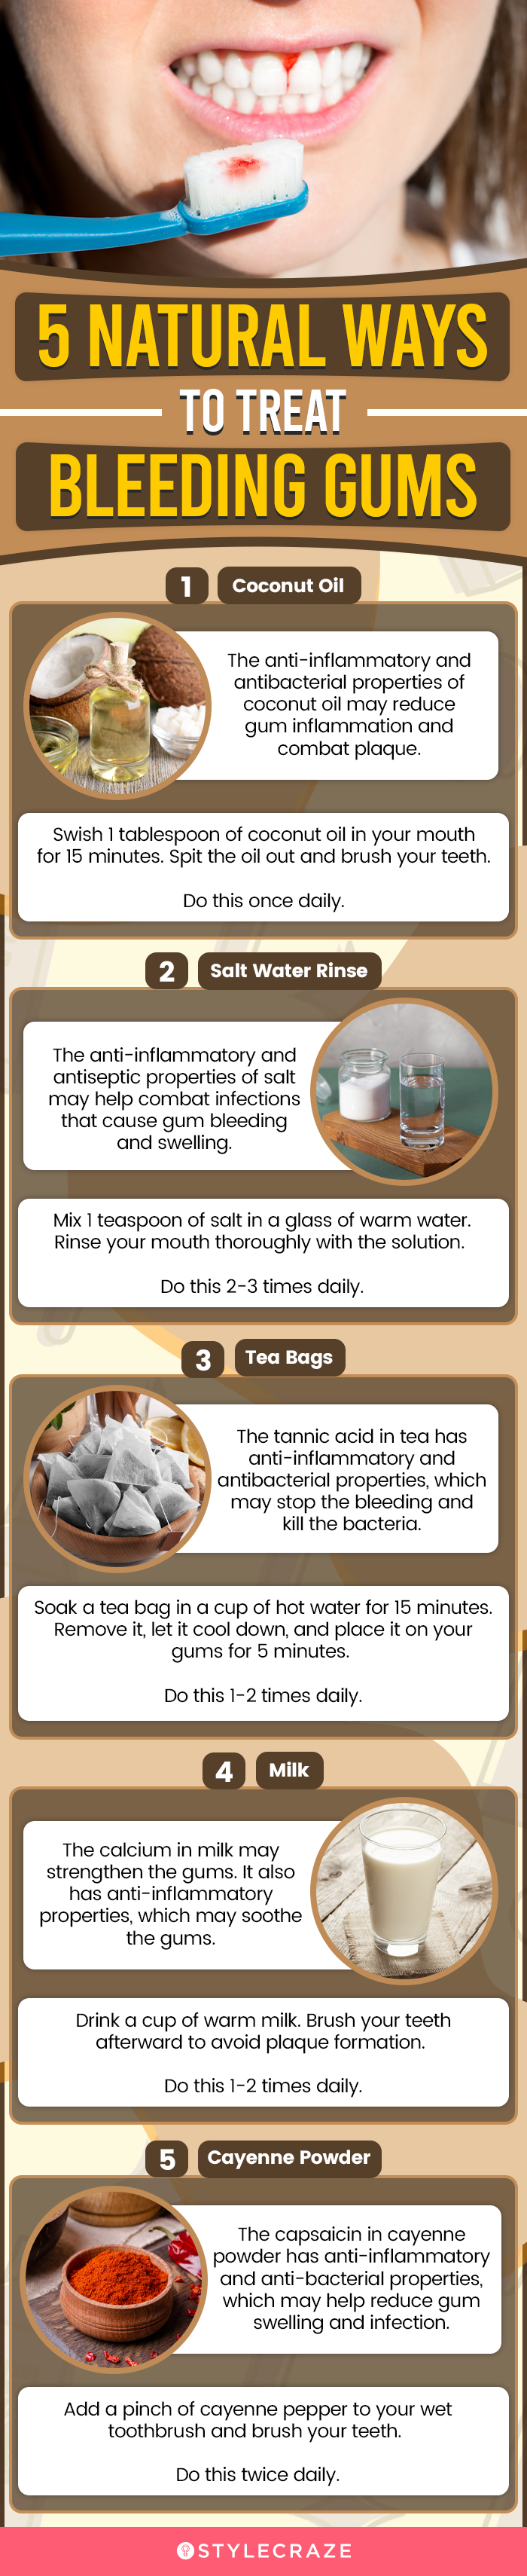 5 natural ways to treat bleeding gums (infographic)